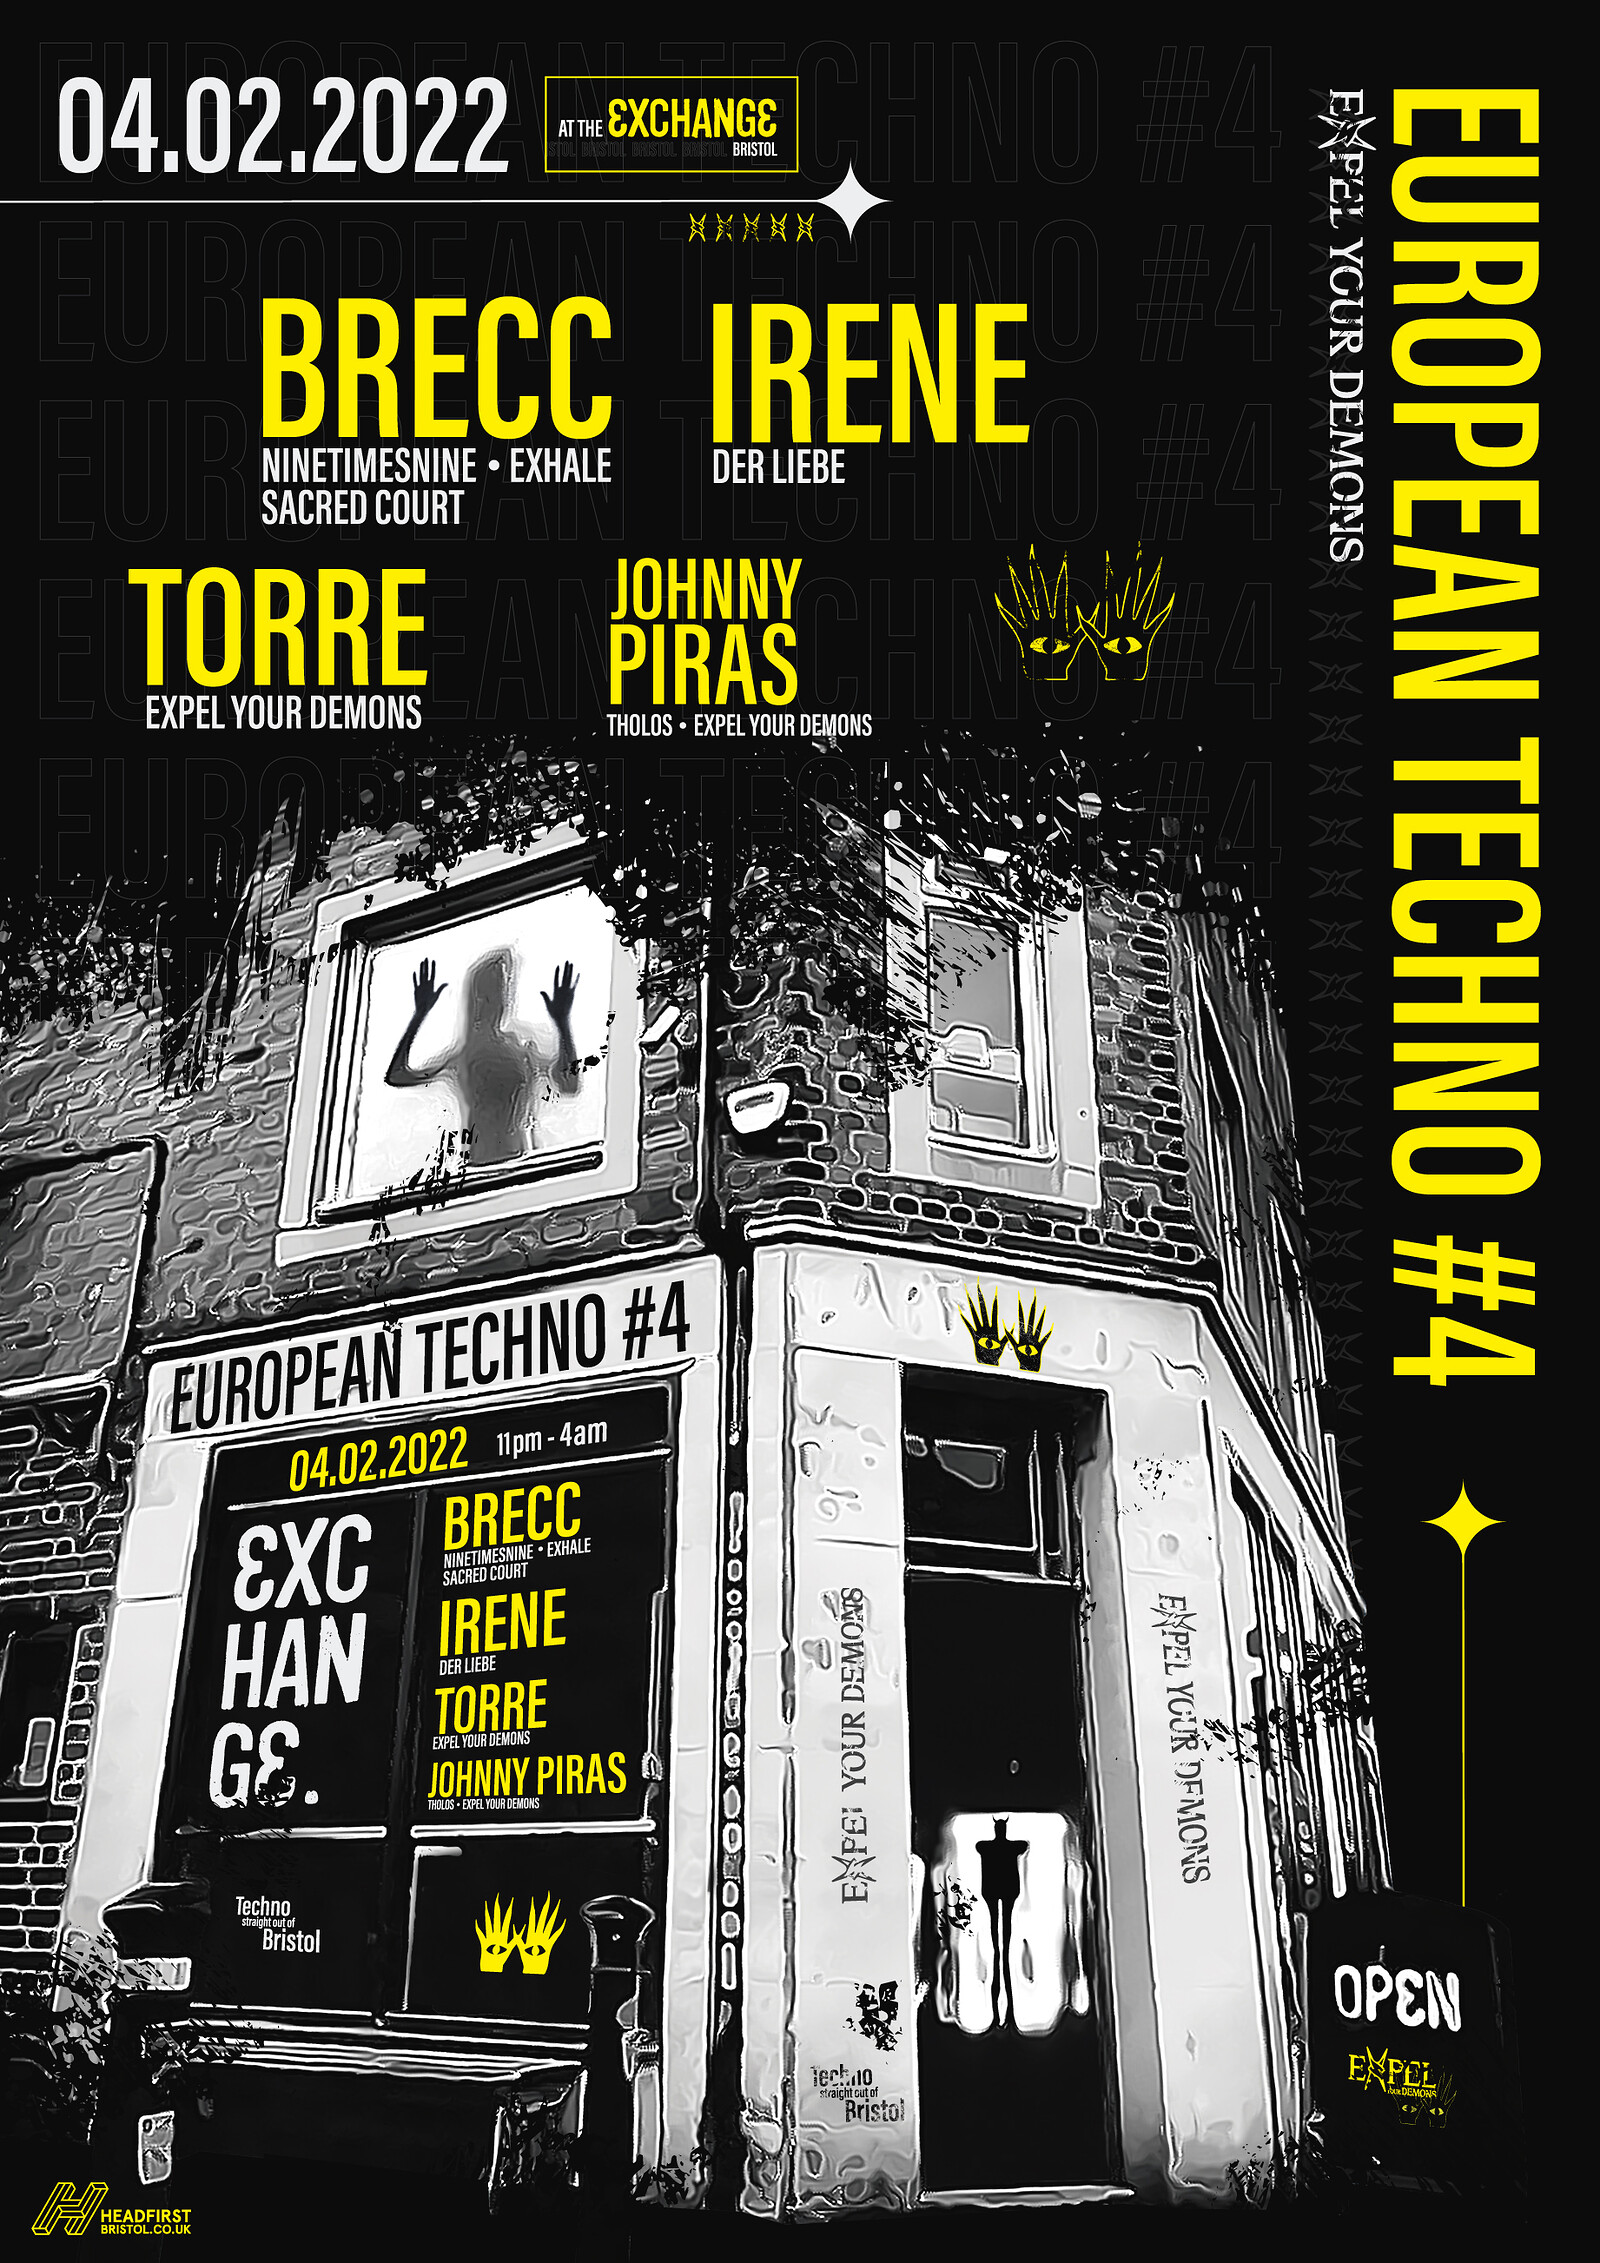 ✟ EUROPEAN TECHNO #4 - TICKETS AVAILABLE AT DOOR at Exchange